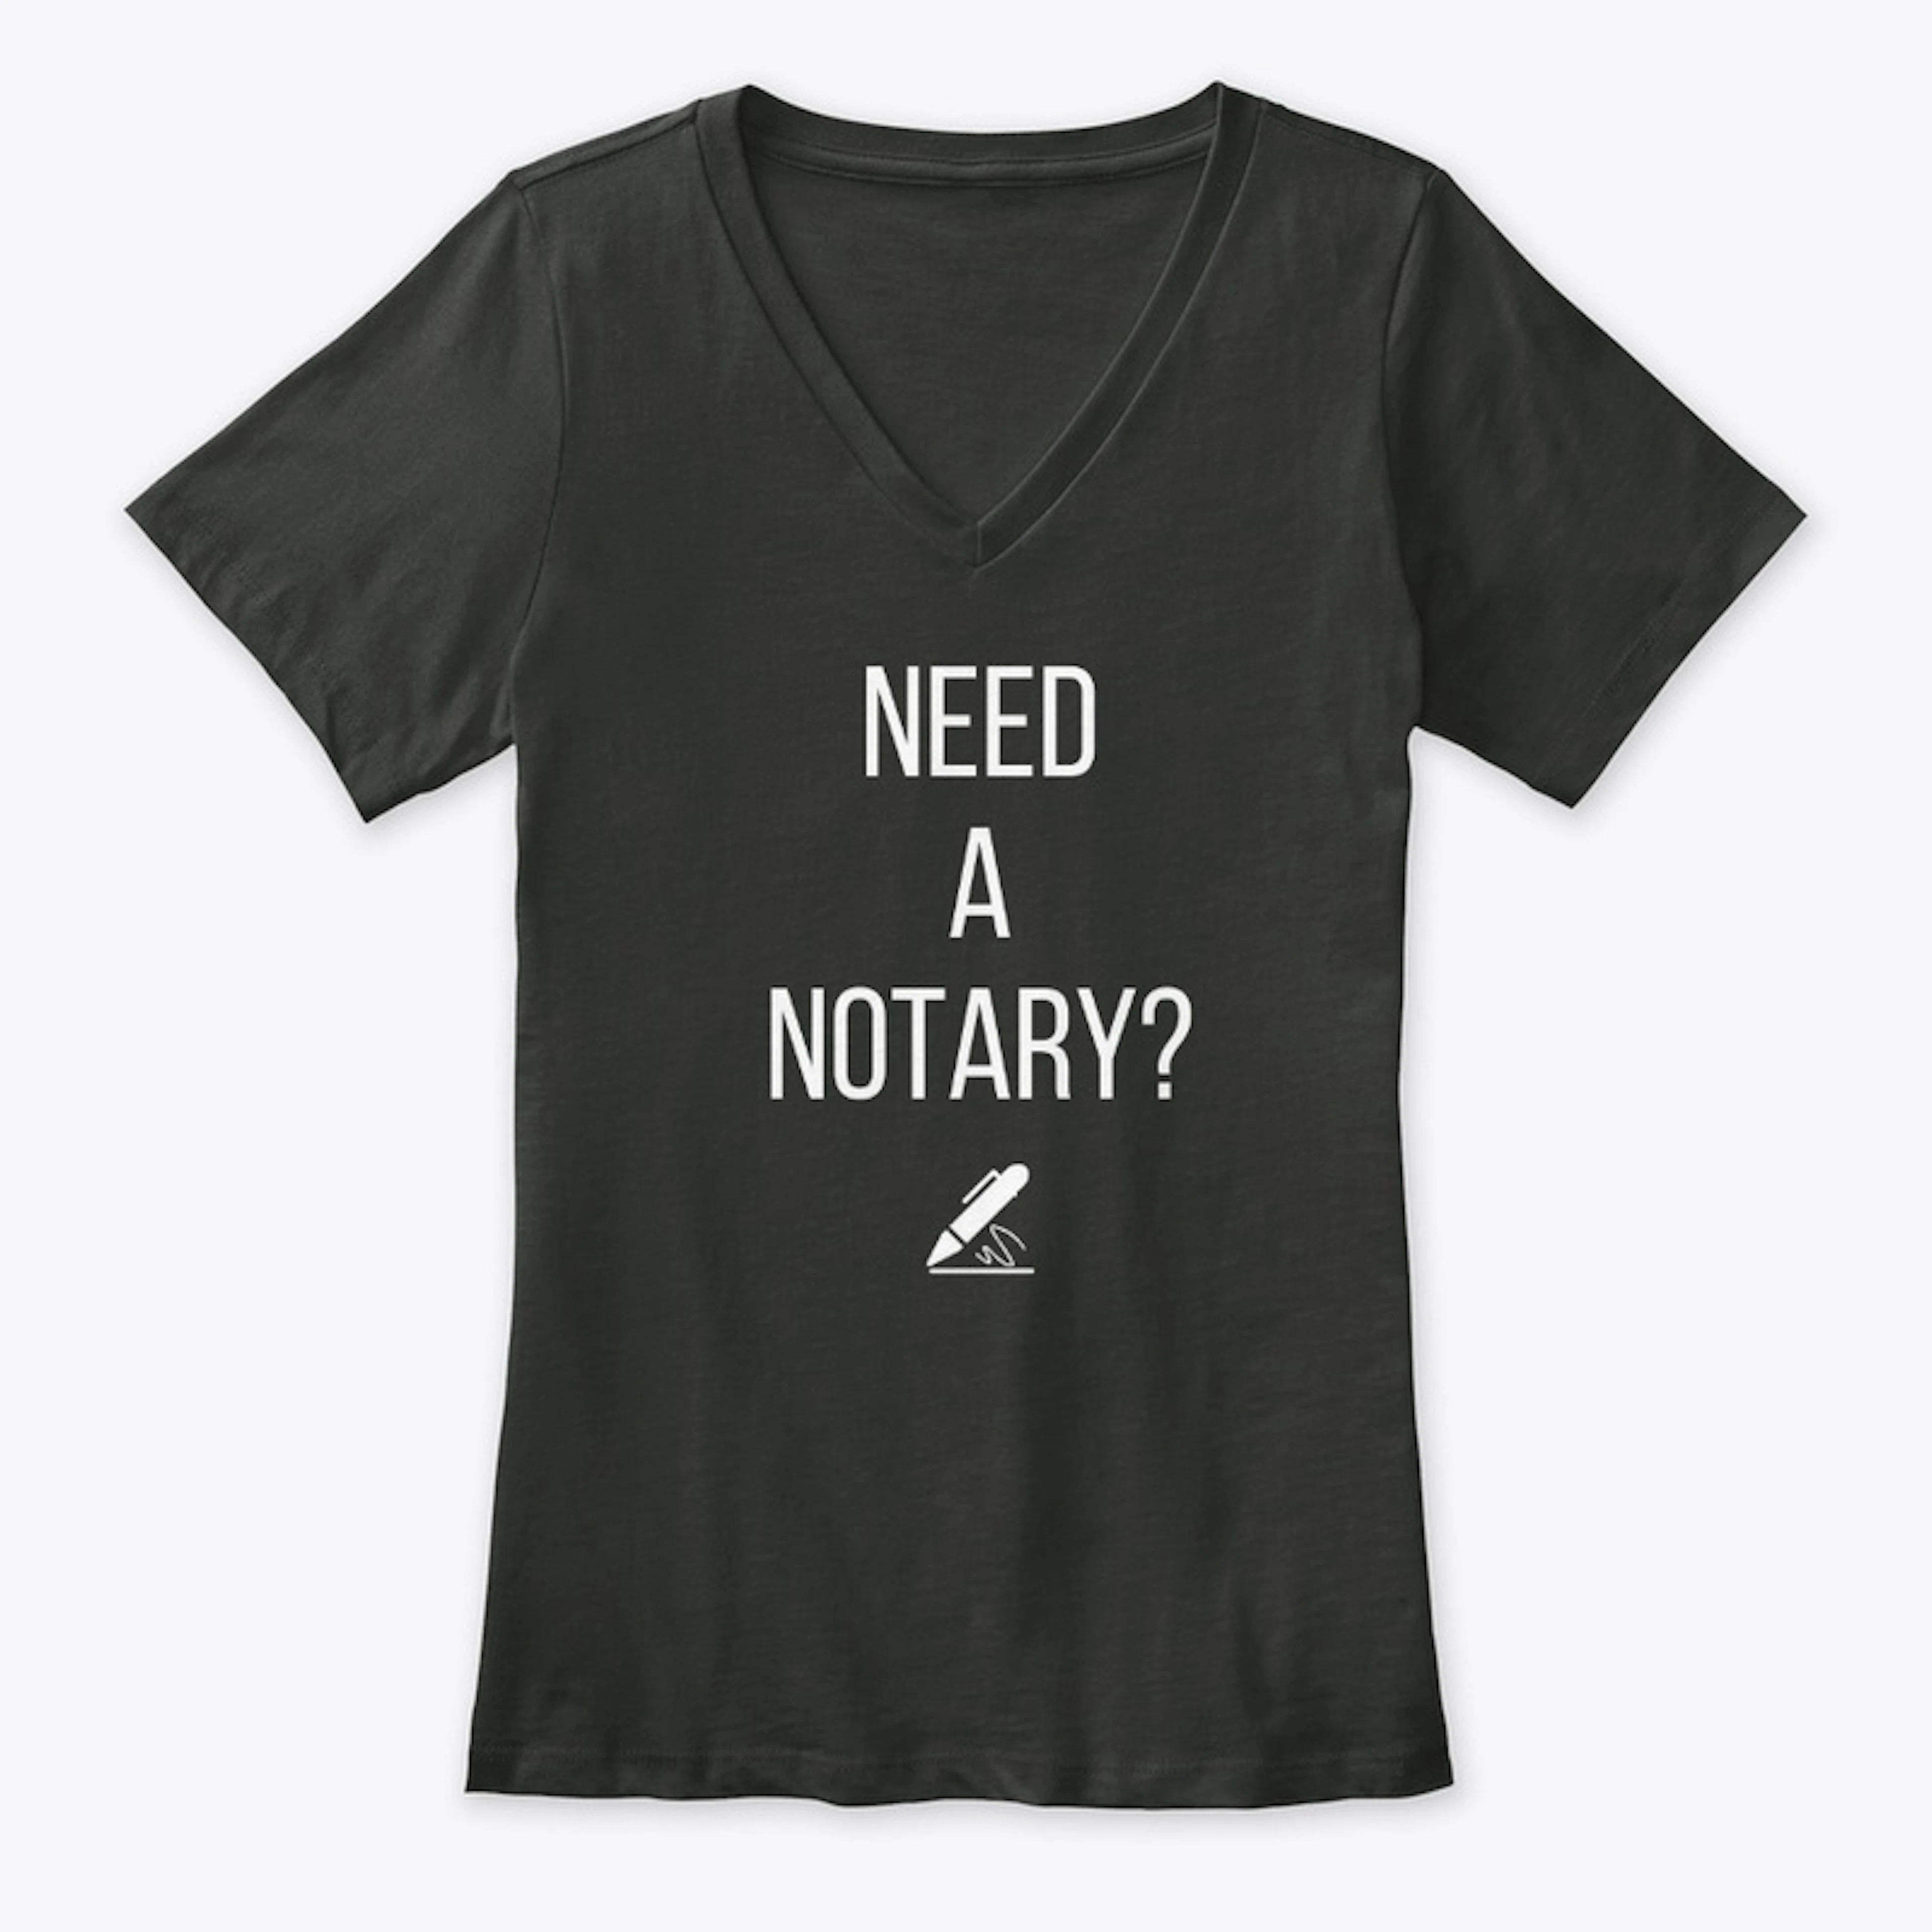 Need A Notary (Noir)